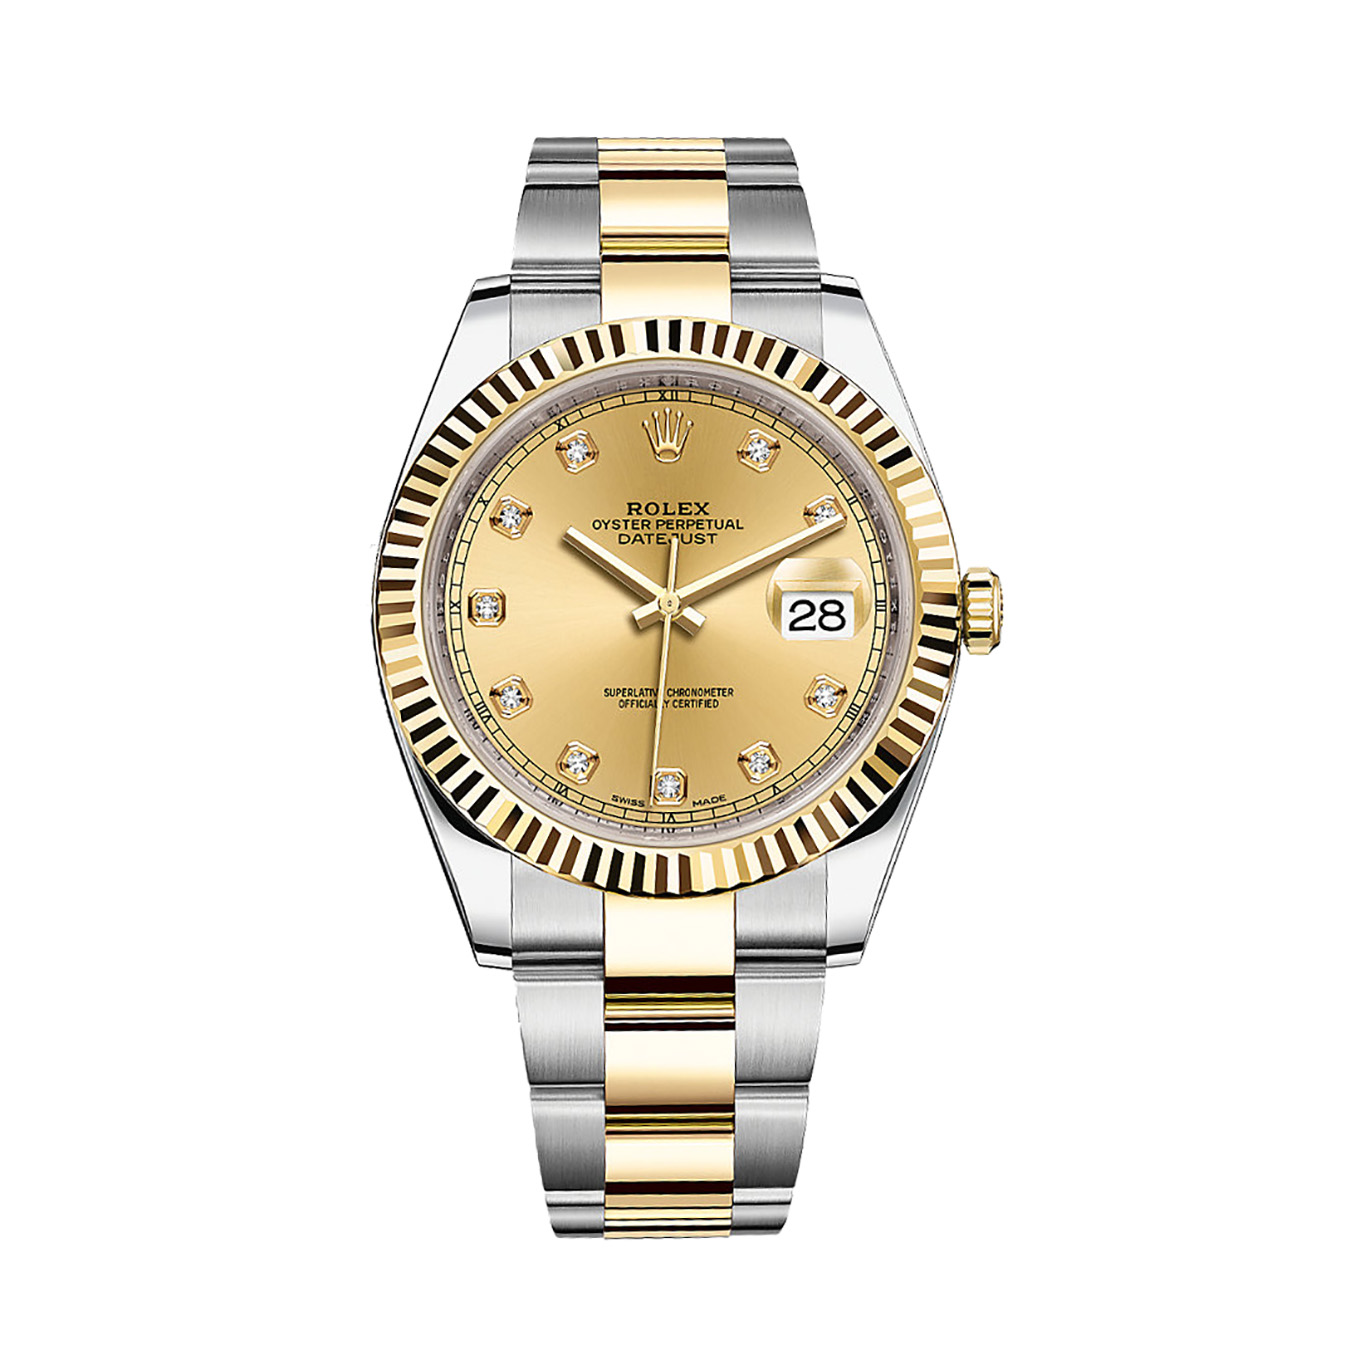 Datejust 41 126333 Gold & Stainless Steel Watch (Champagne Set With Diamonds)